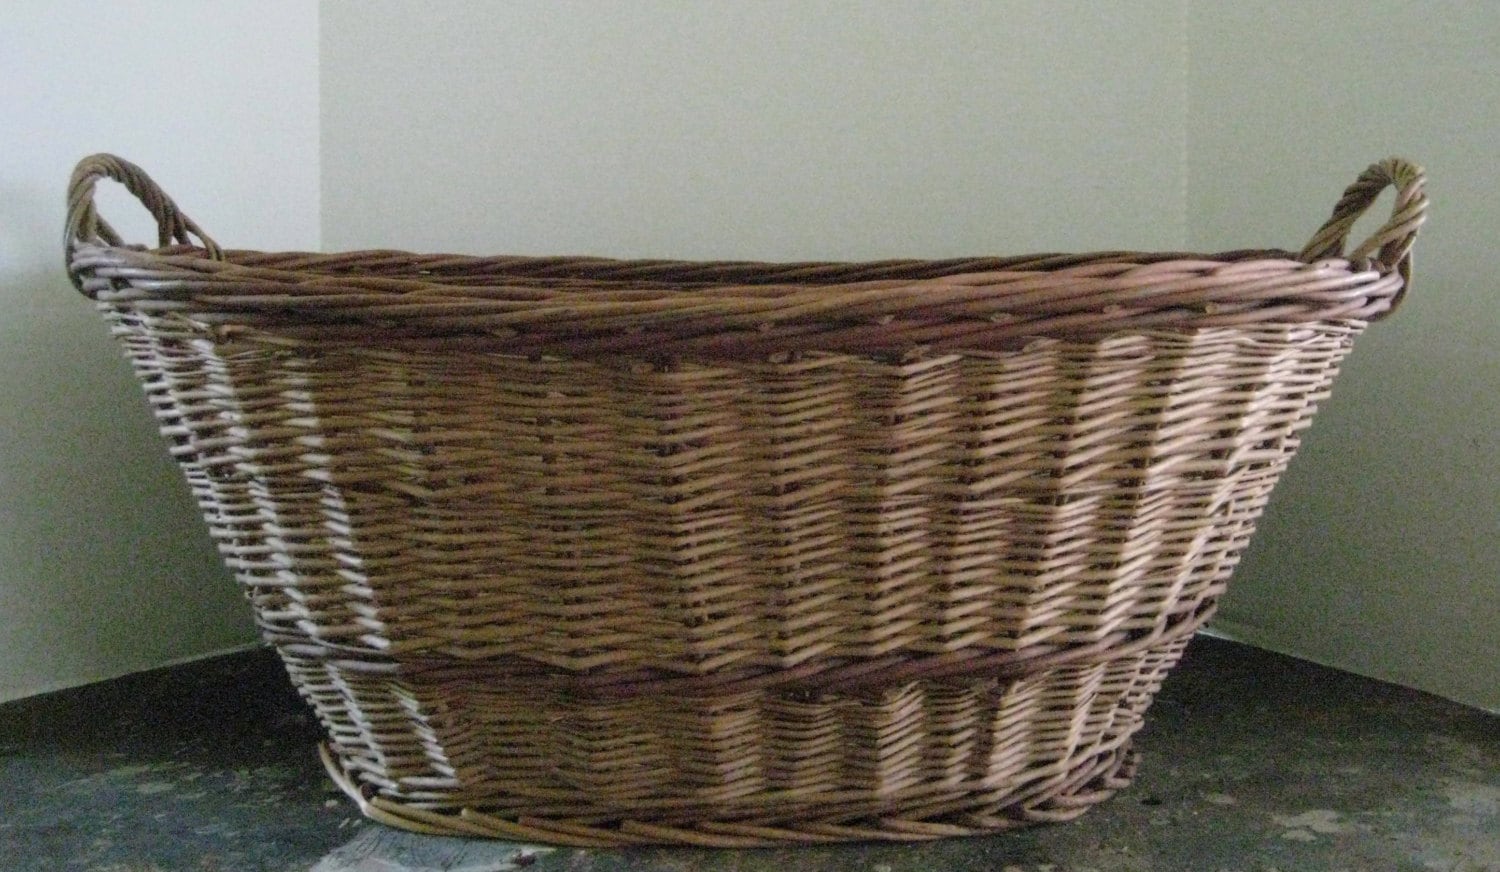 Vintage Hand Woven Wicker Laundry Basket Made In Holland